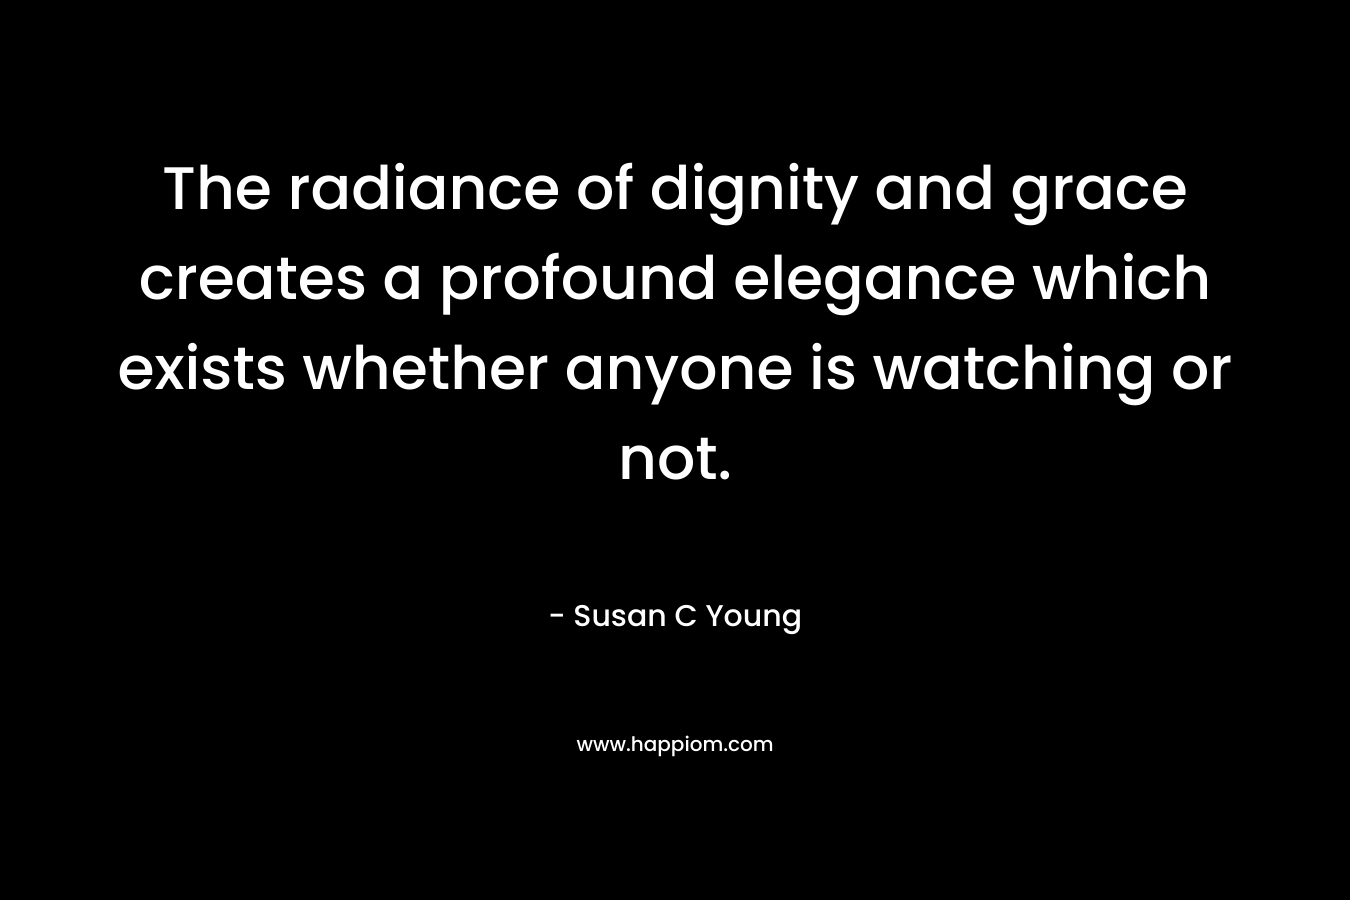 The radiance of dignity and grace creates a profound elegance which exists whether anyone is watching or not. – Susan C Young